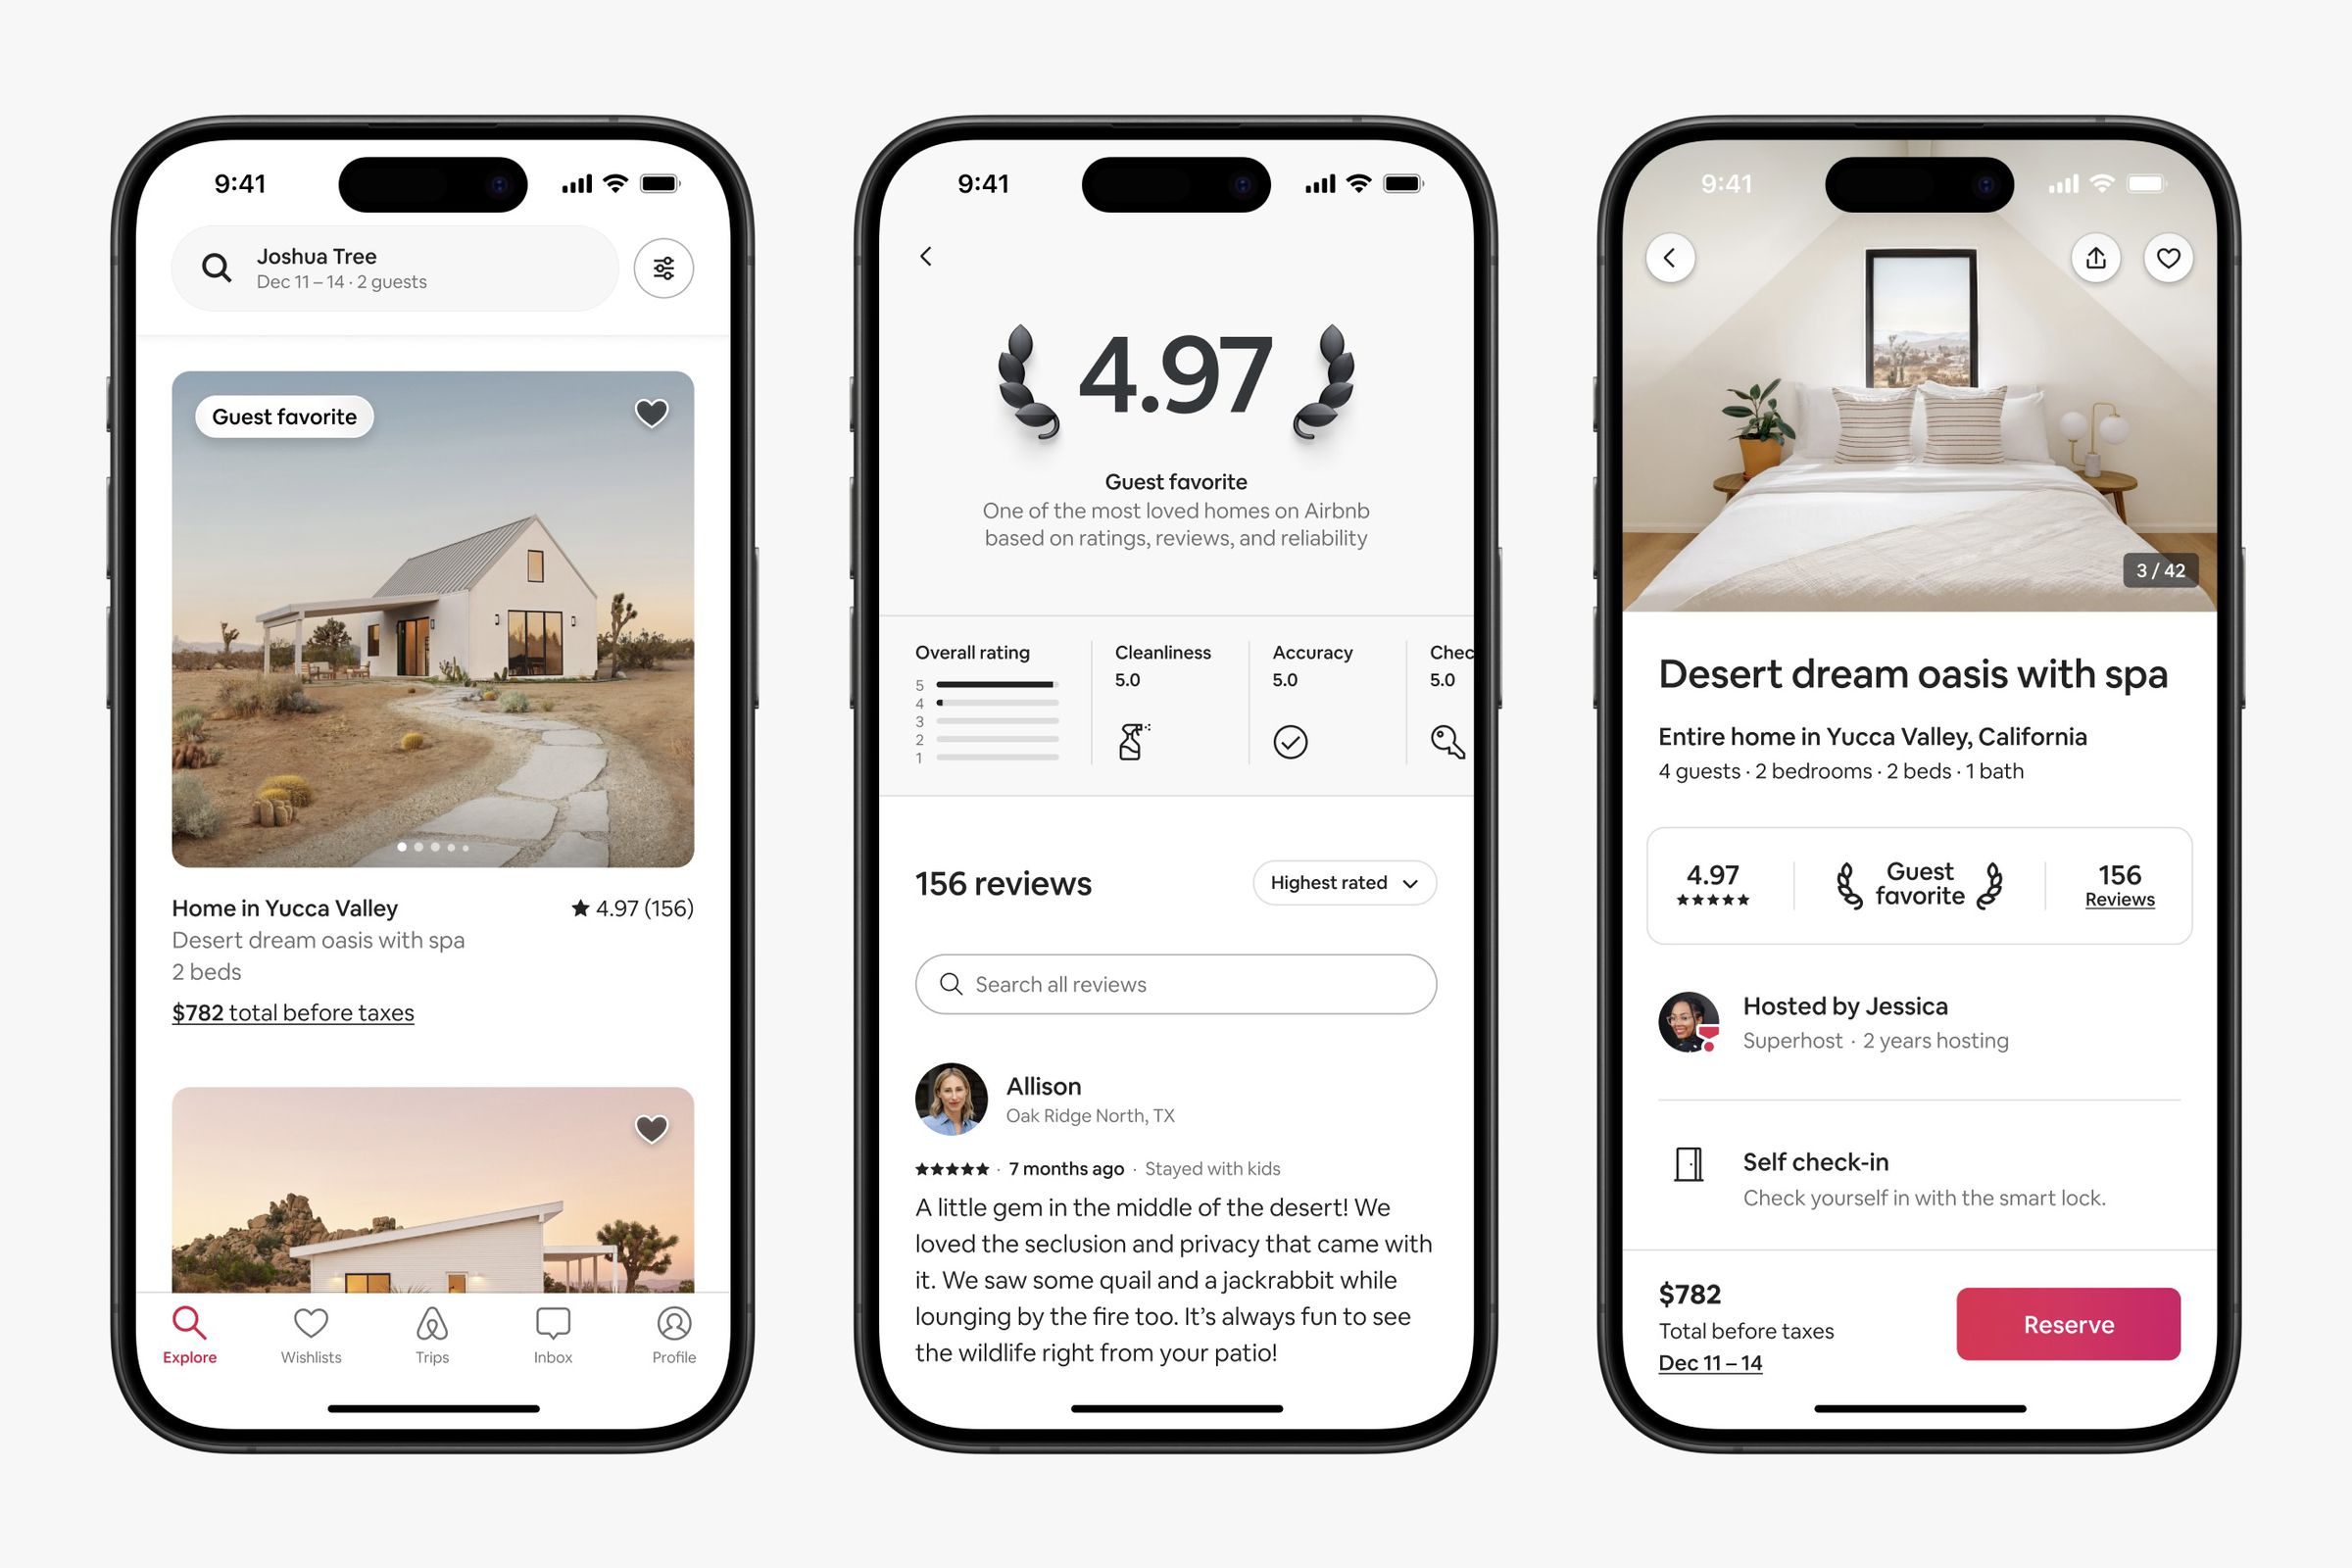 three phone screenshots of the airbnb app with guest favorites listings in search, a score of 4.97 with film festival style wreath around it.